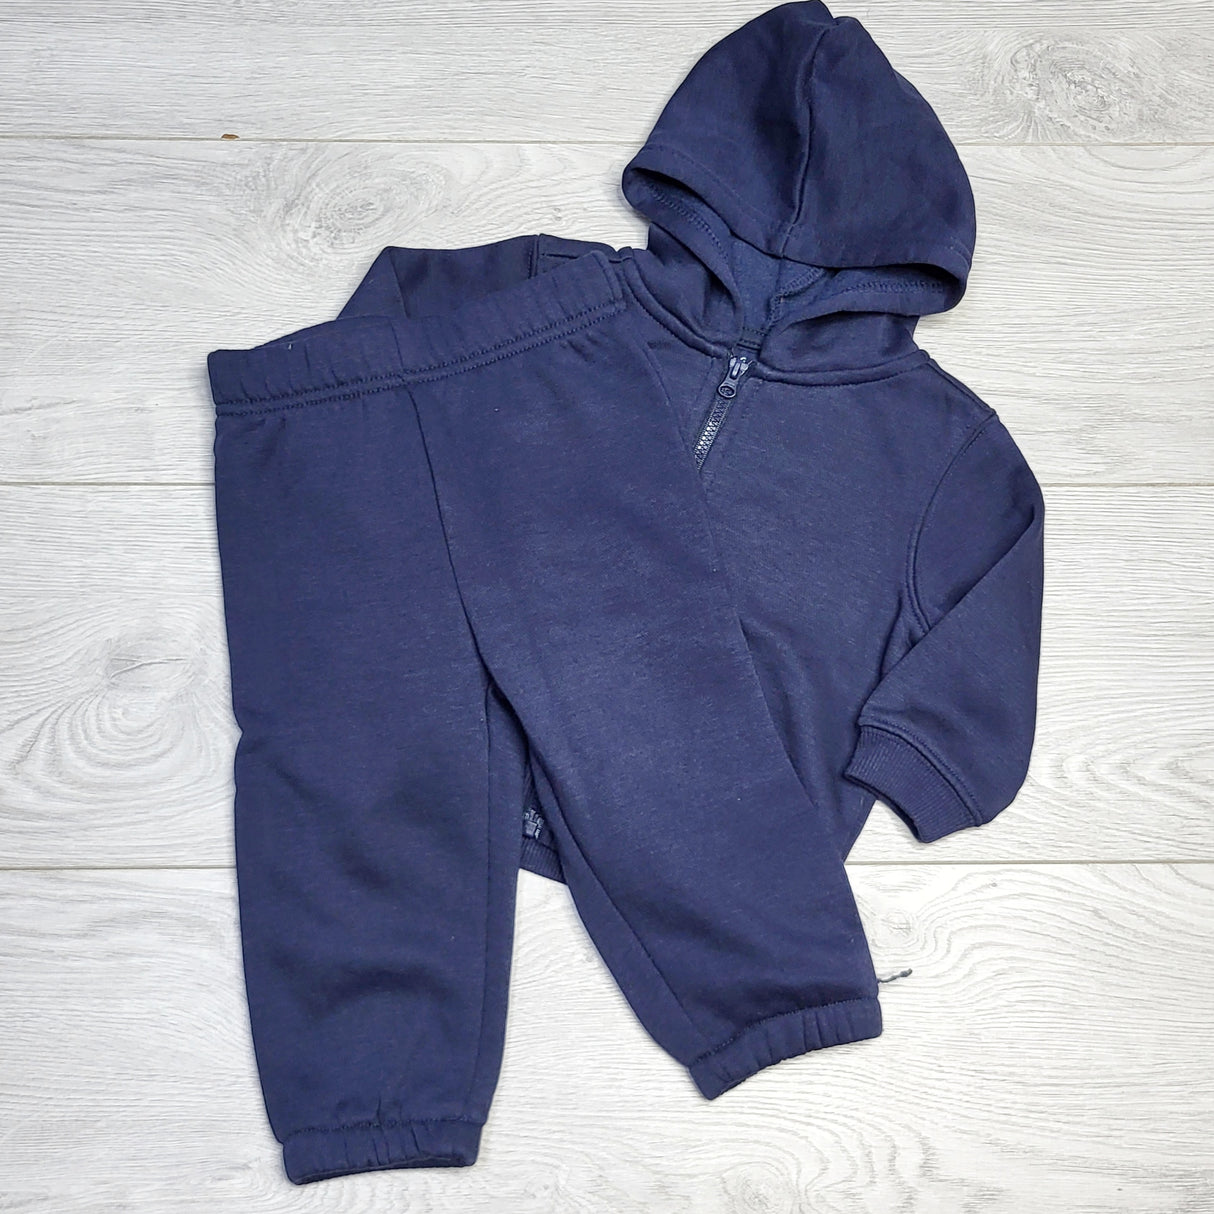 RZA21 - George navy 2pc fleecy lined hoodie set. Size 6-12 months